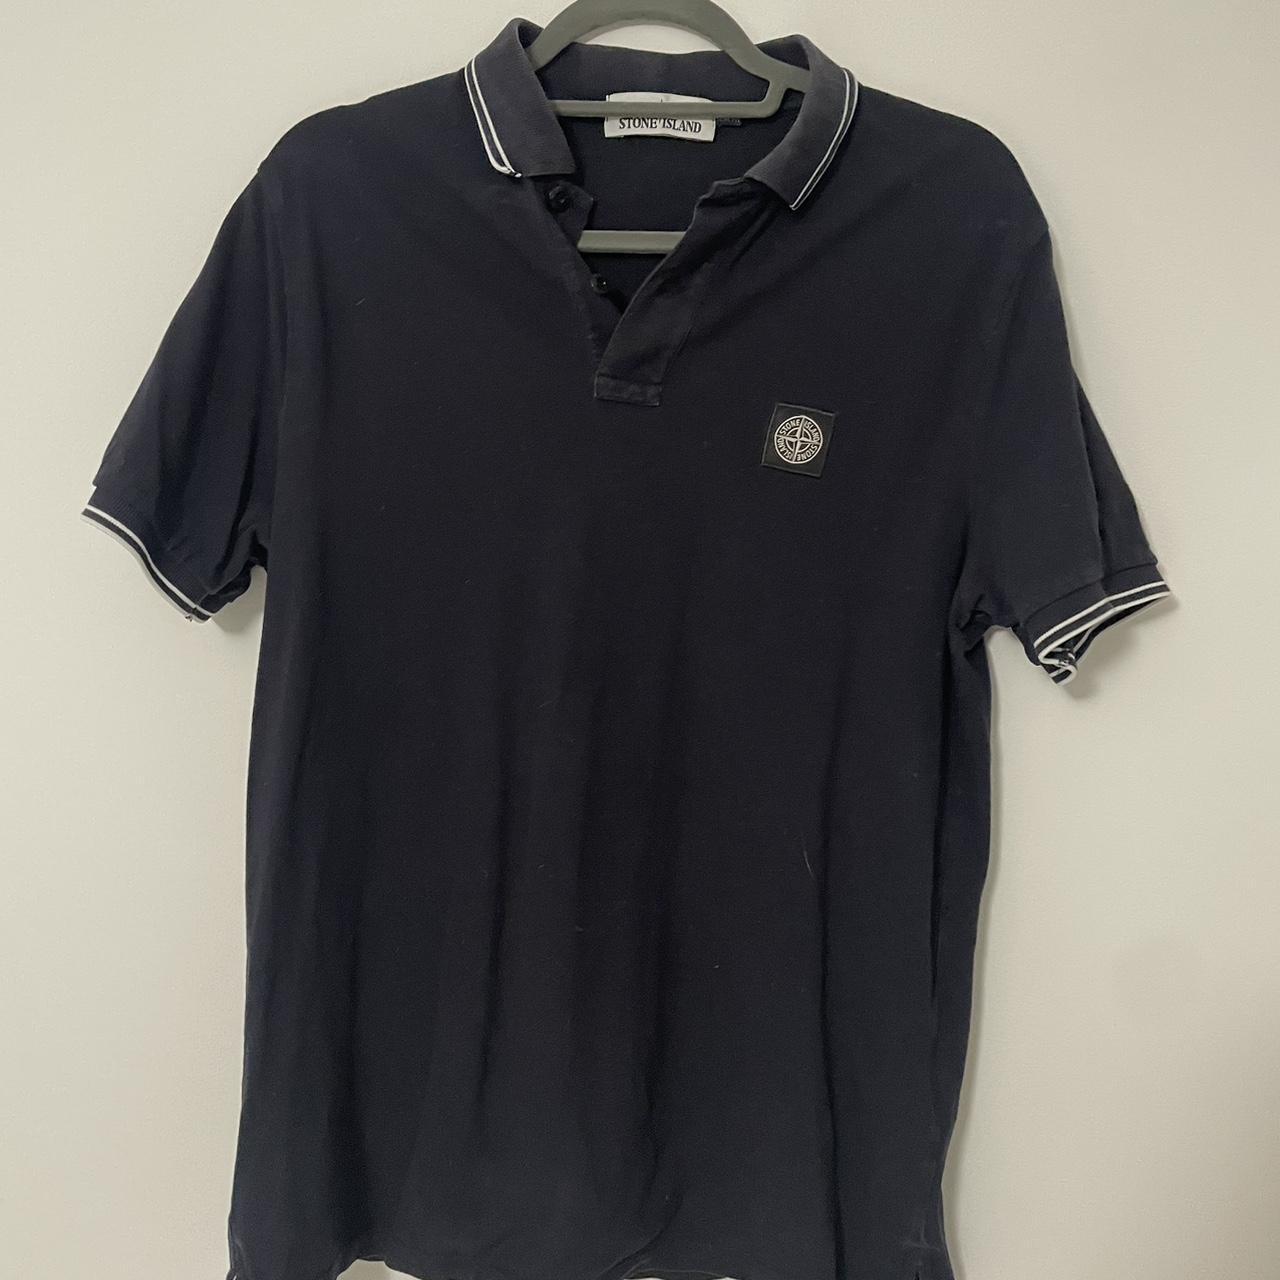 Stone Island Polo - L 100% authentic Used but... - Depop